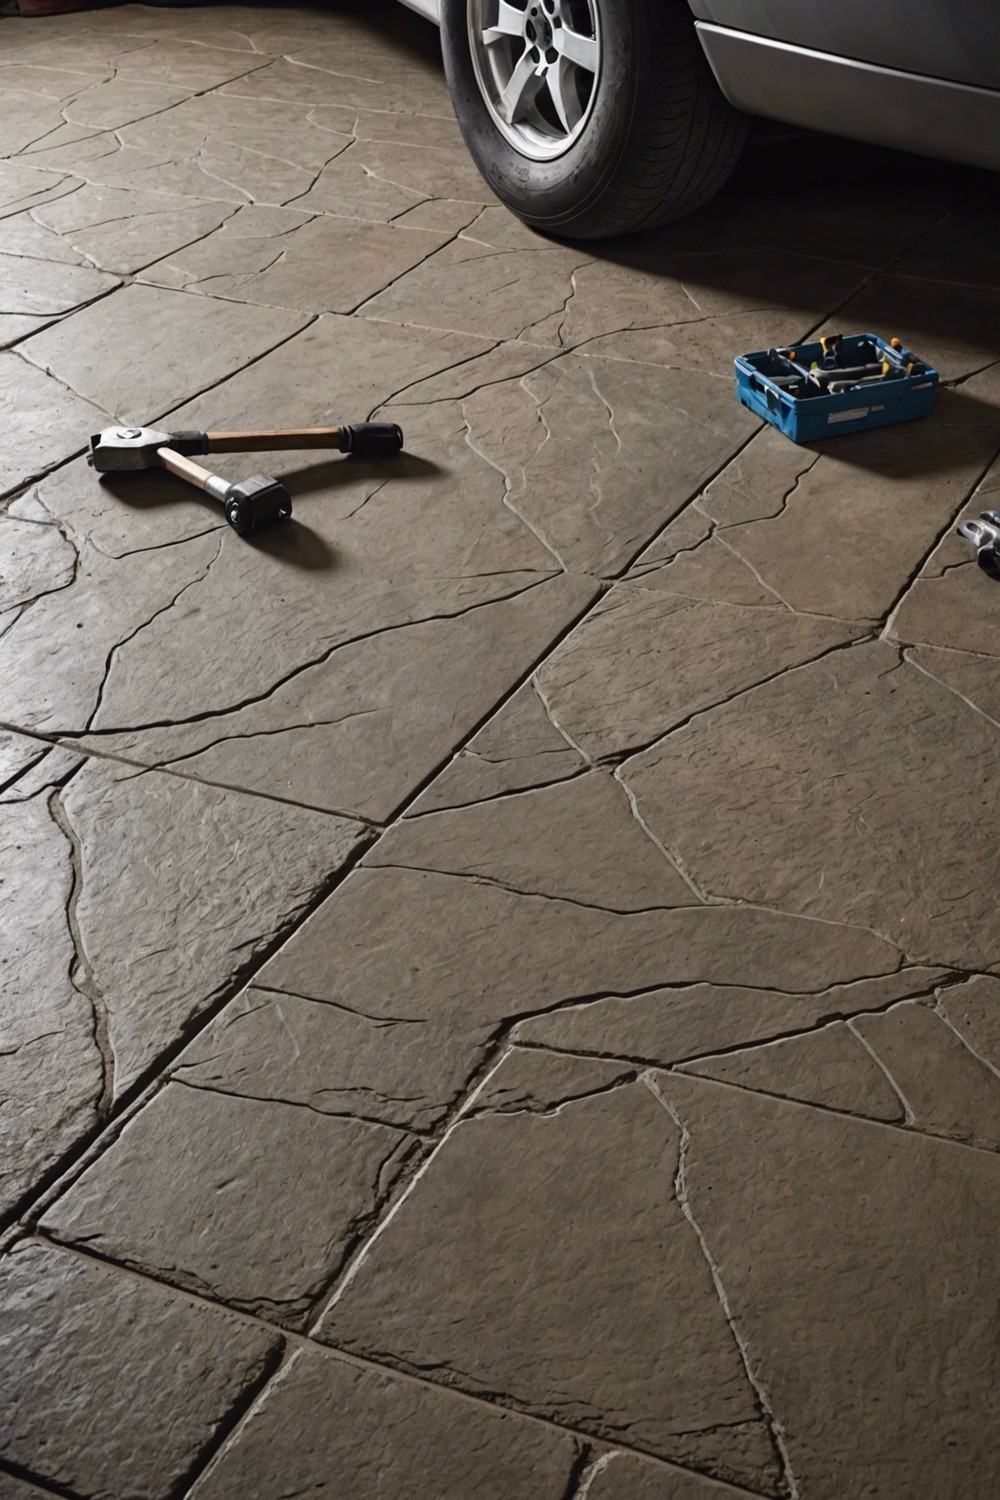 Stamped Concrete: Create a Patterned Design